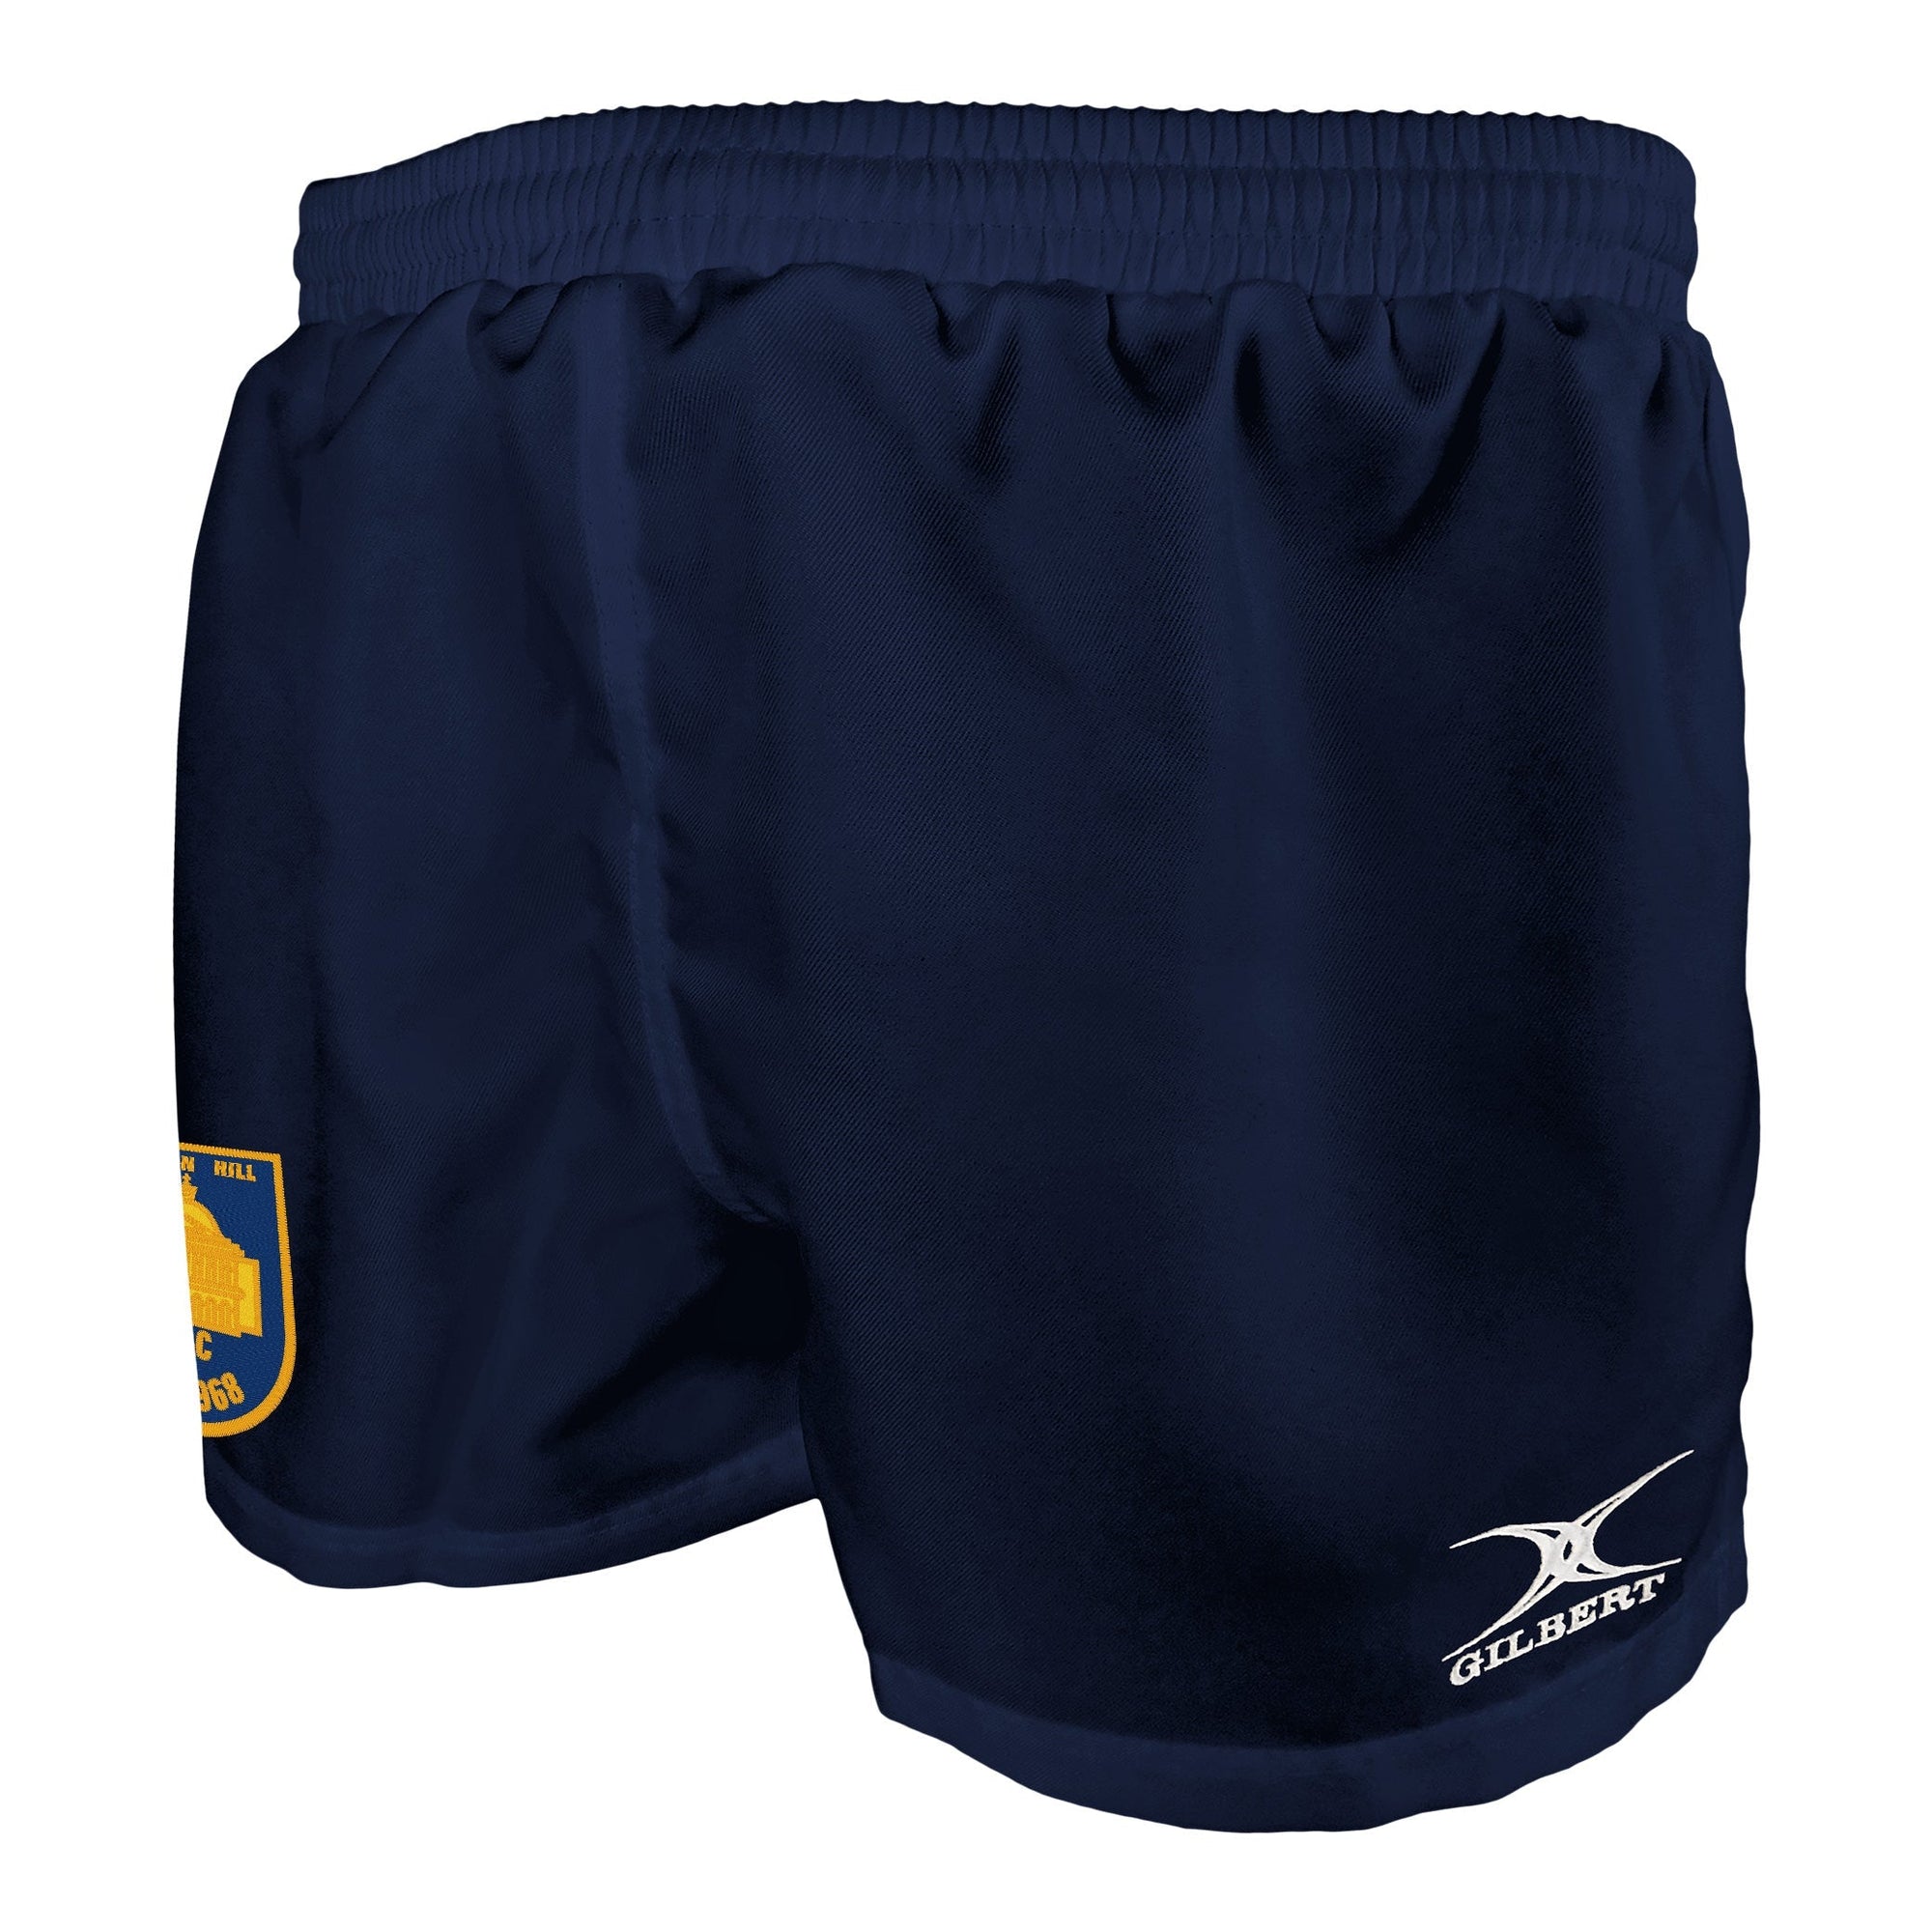 Rugby Imports Beacon Hill RFC Saracen Rugby Shorts